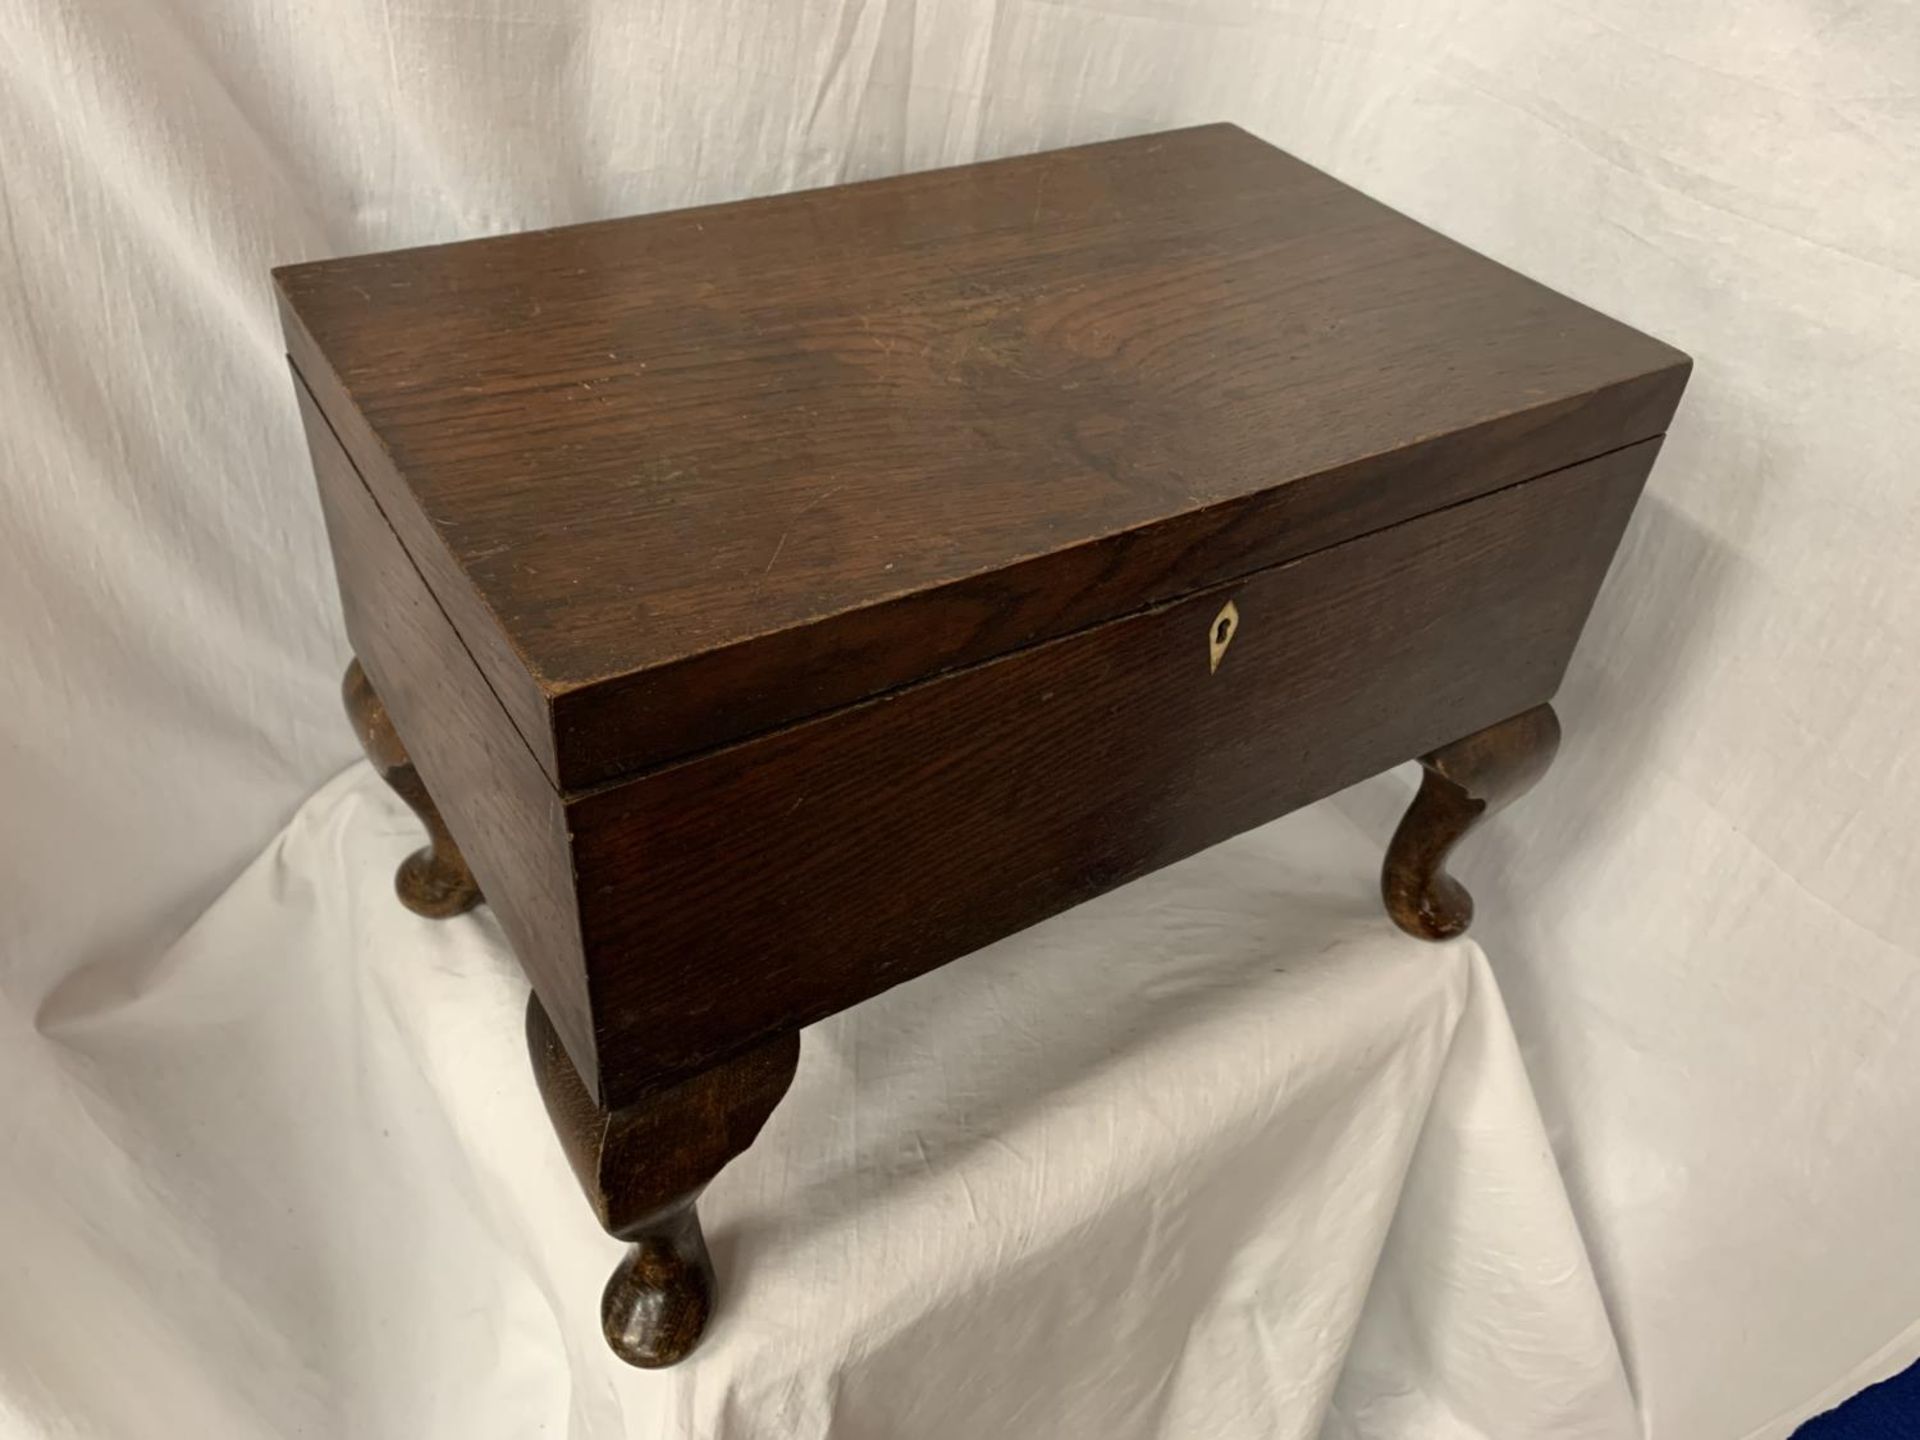 A VINTAGE MAHOGANY SEWING BOX TO INCLUDE THE CONTENTS OF A LARGE QUANTITY OF SEWING RELATED ITEMS H: